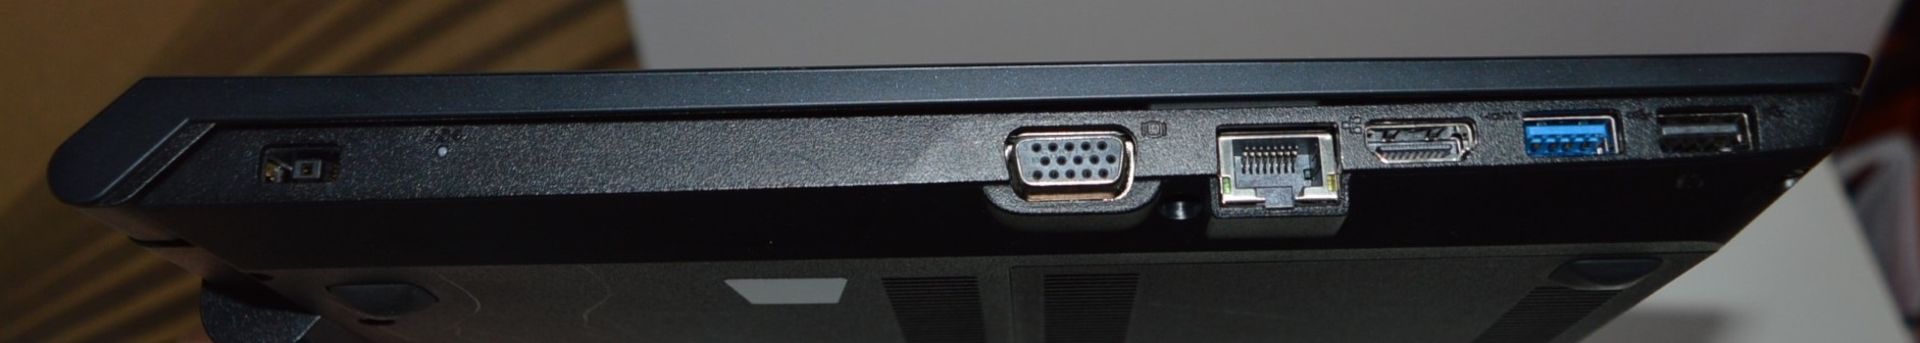 1 x Lenovo B50 Laptop Computer - Features an Intel N2840 2.16ghz Dual Core Proceossor, 4gb Ram, - Image 11 of 11